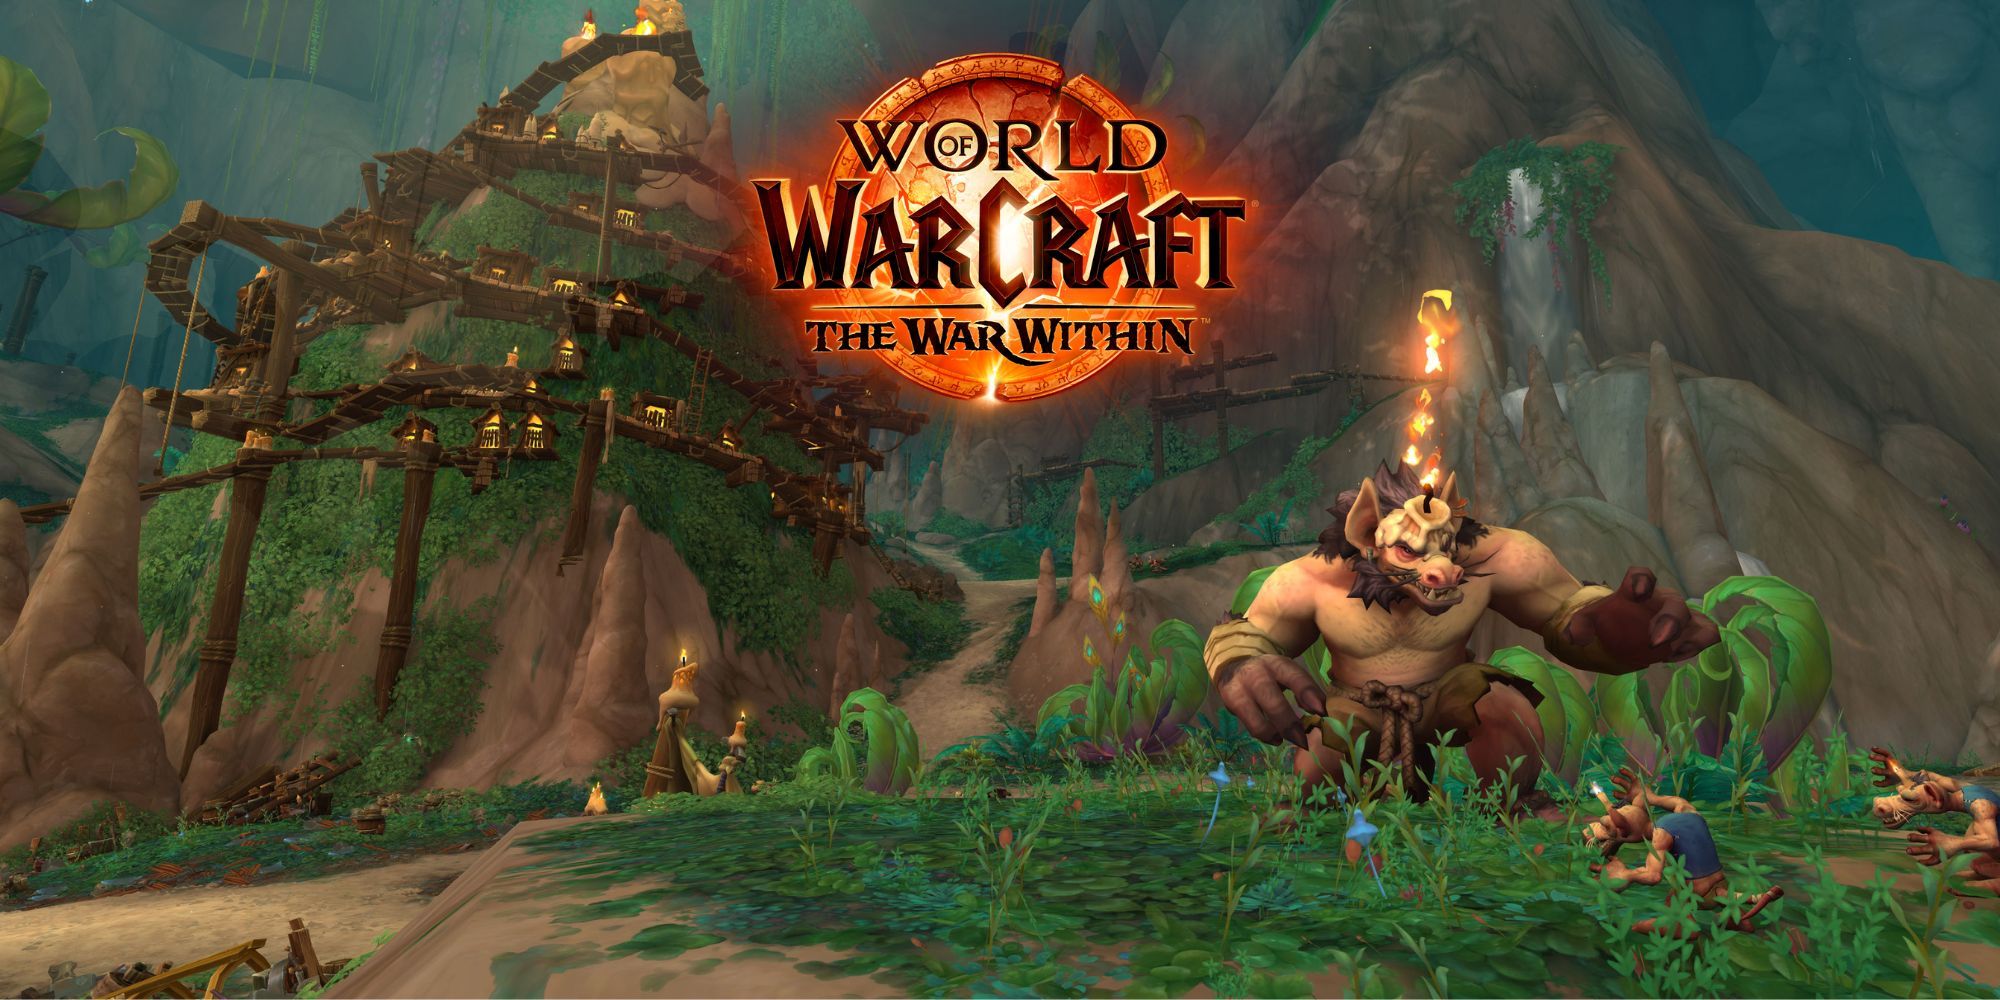 World of Warcraft The War Within logo in front of a screenshot with some kobolds